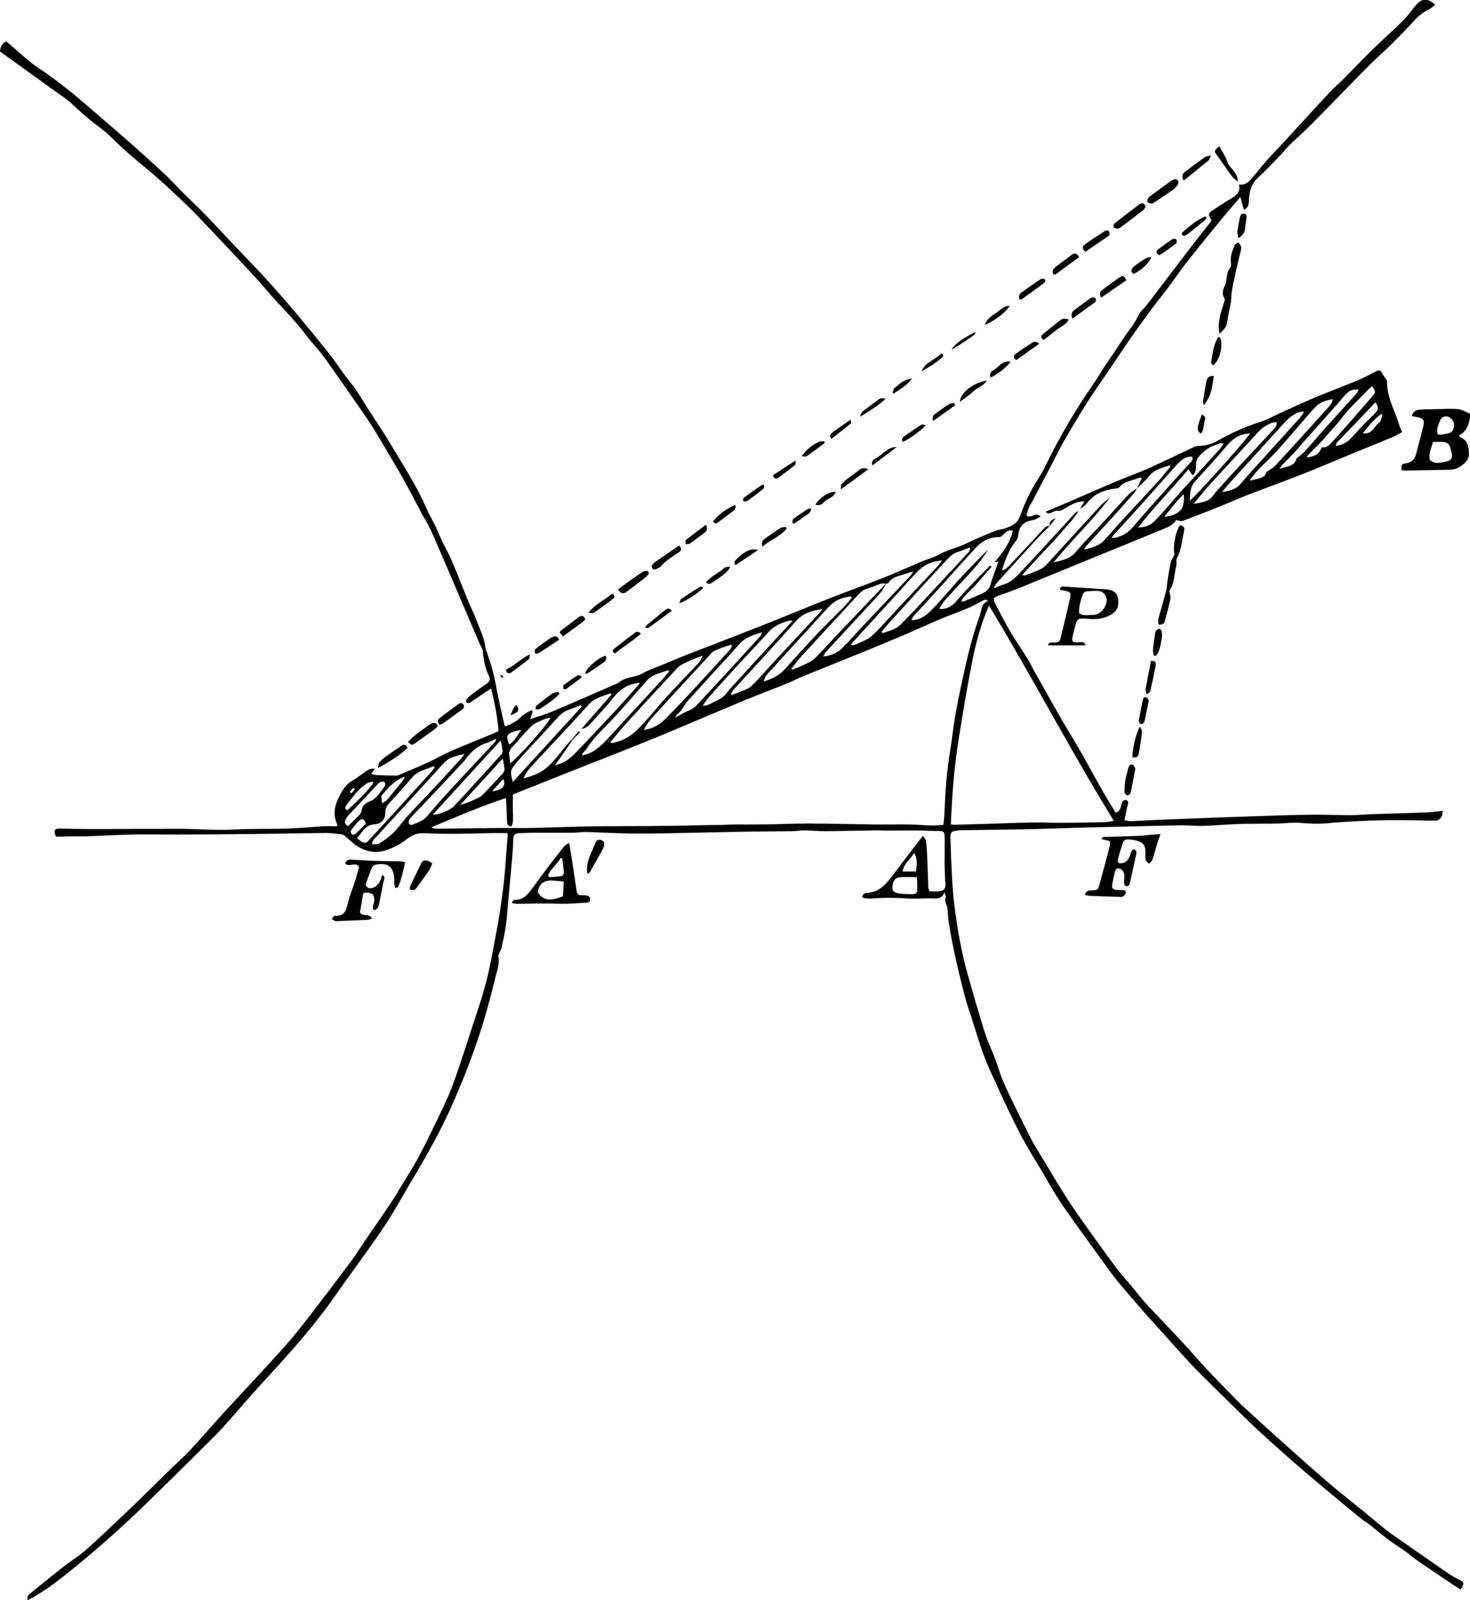 A hyperbola is two curves and the other curve is a mirror image, vintage line drawing or engraving illustration.